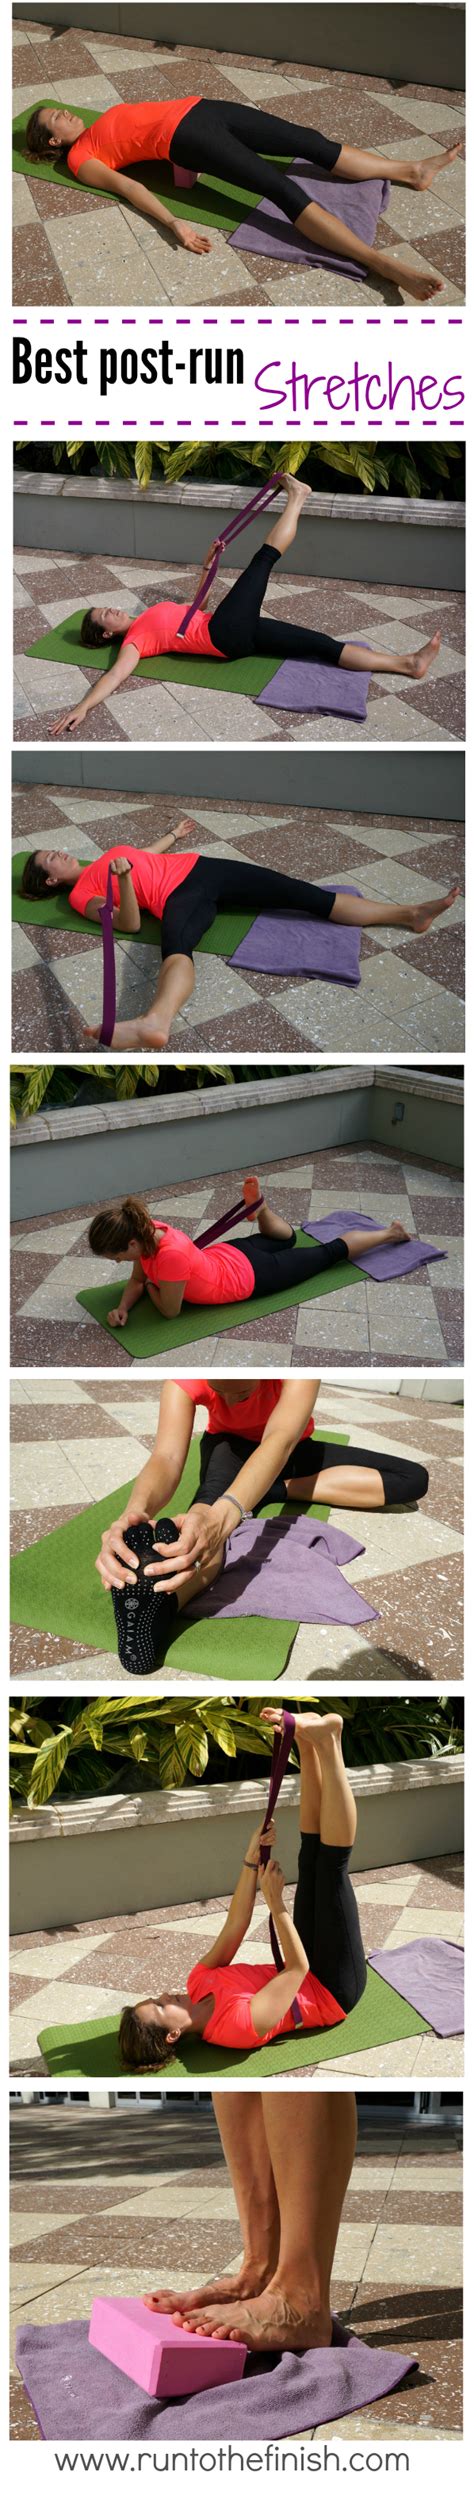 Best Post Run Stretches For It Band And Hips Runtothefinish